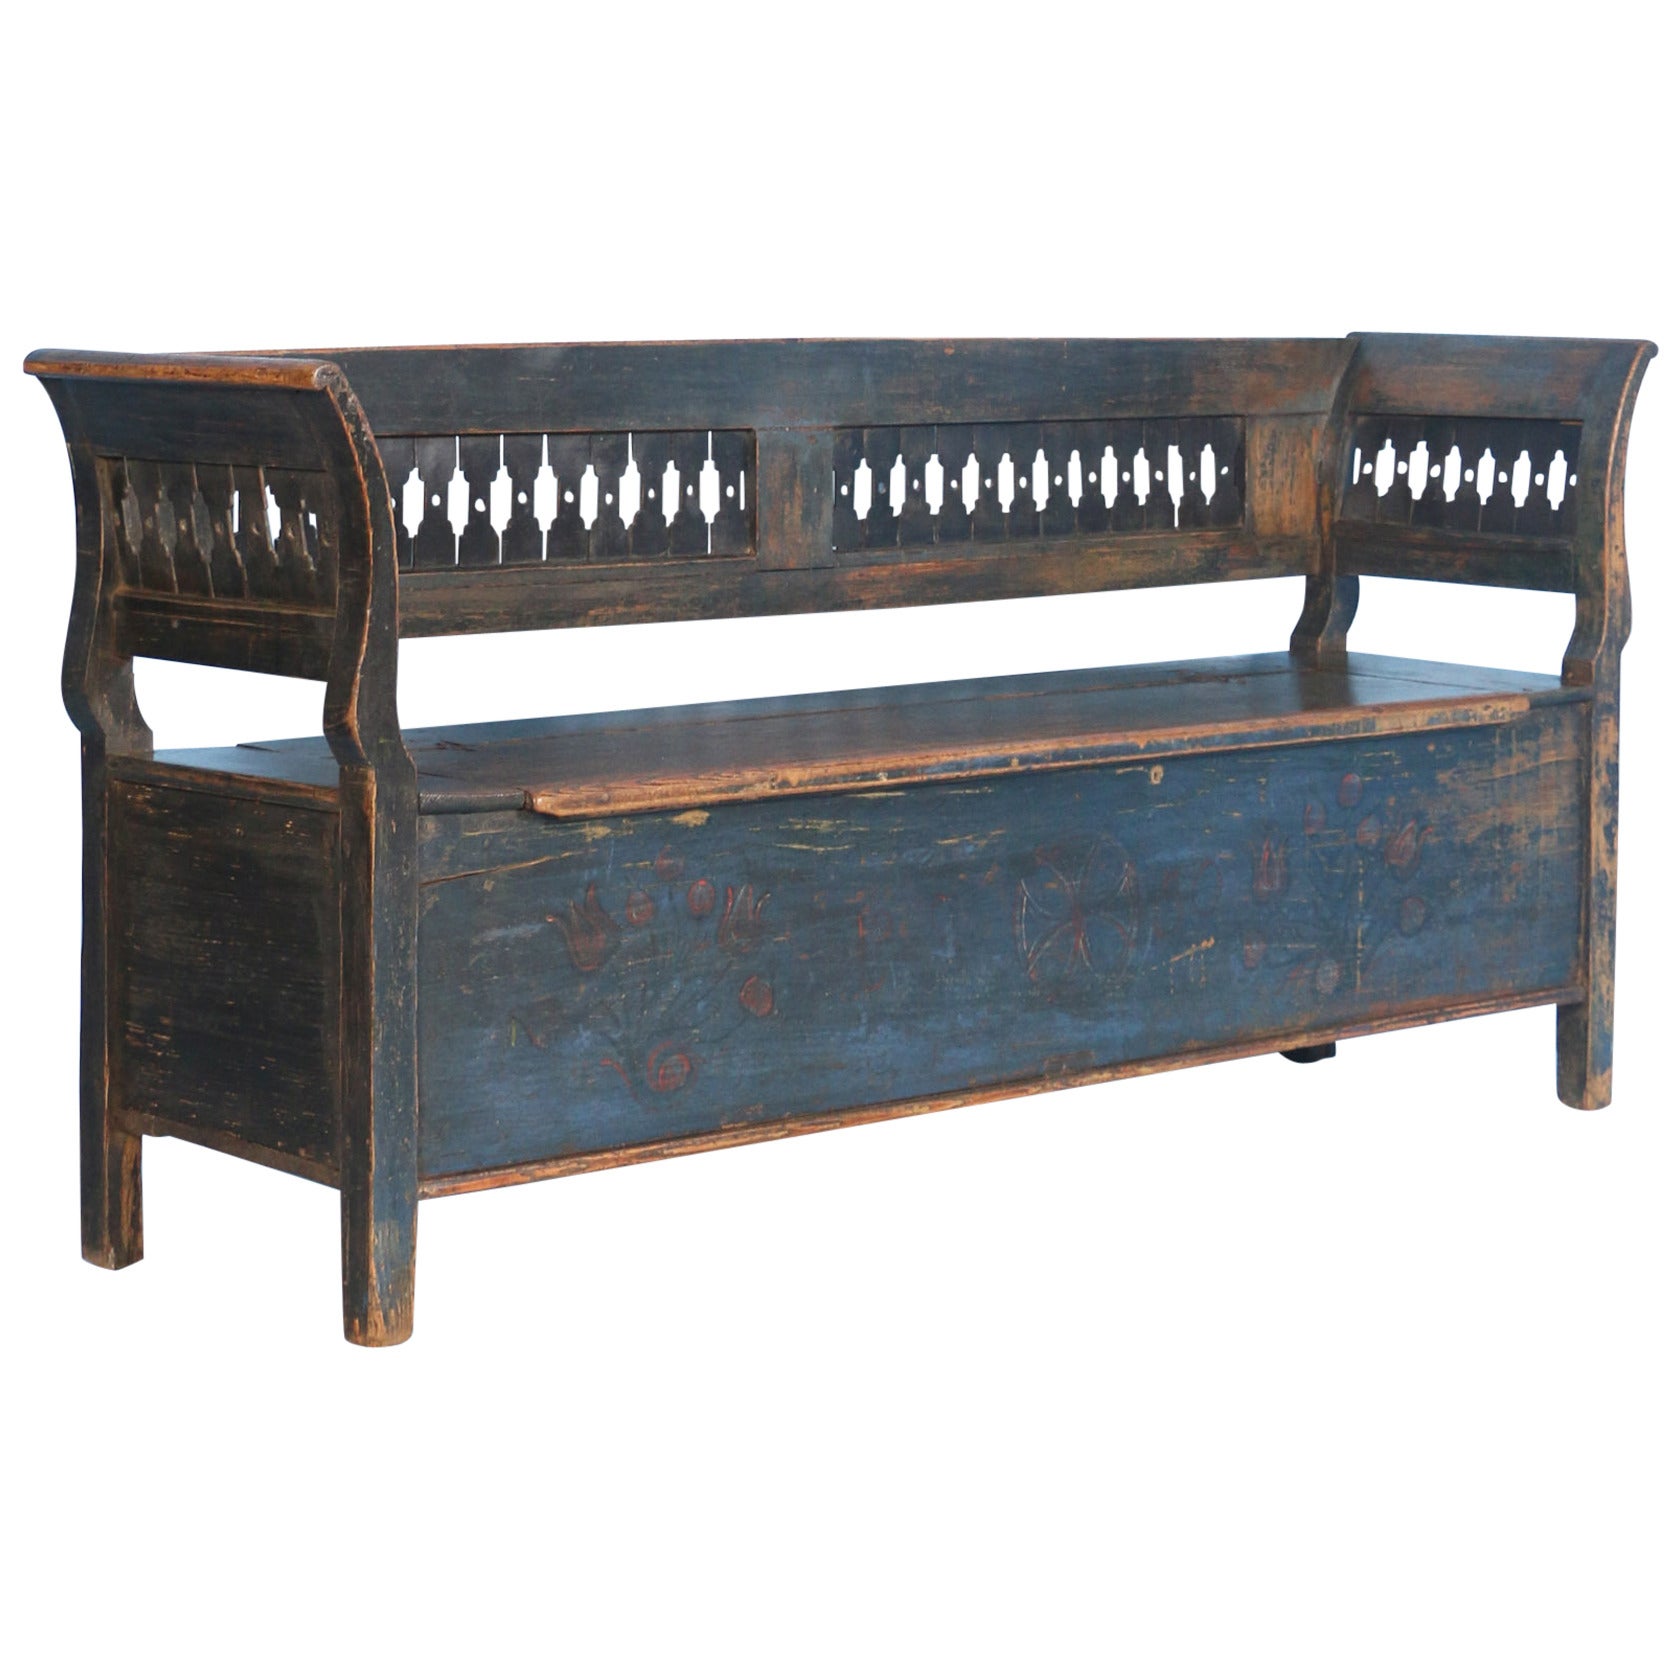 Antique Romanian Dark Blue Painted Bench, dated 1850